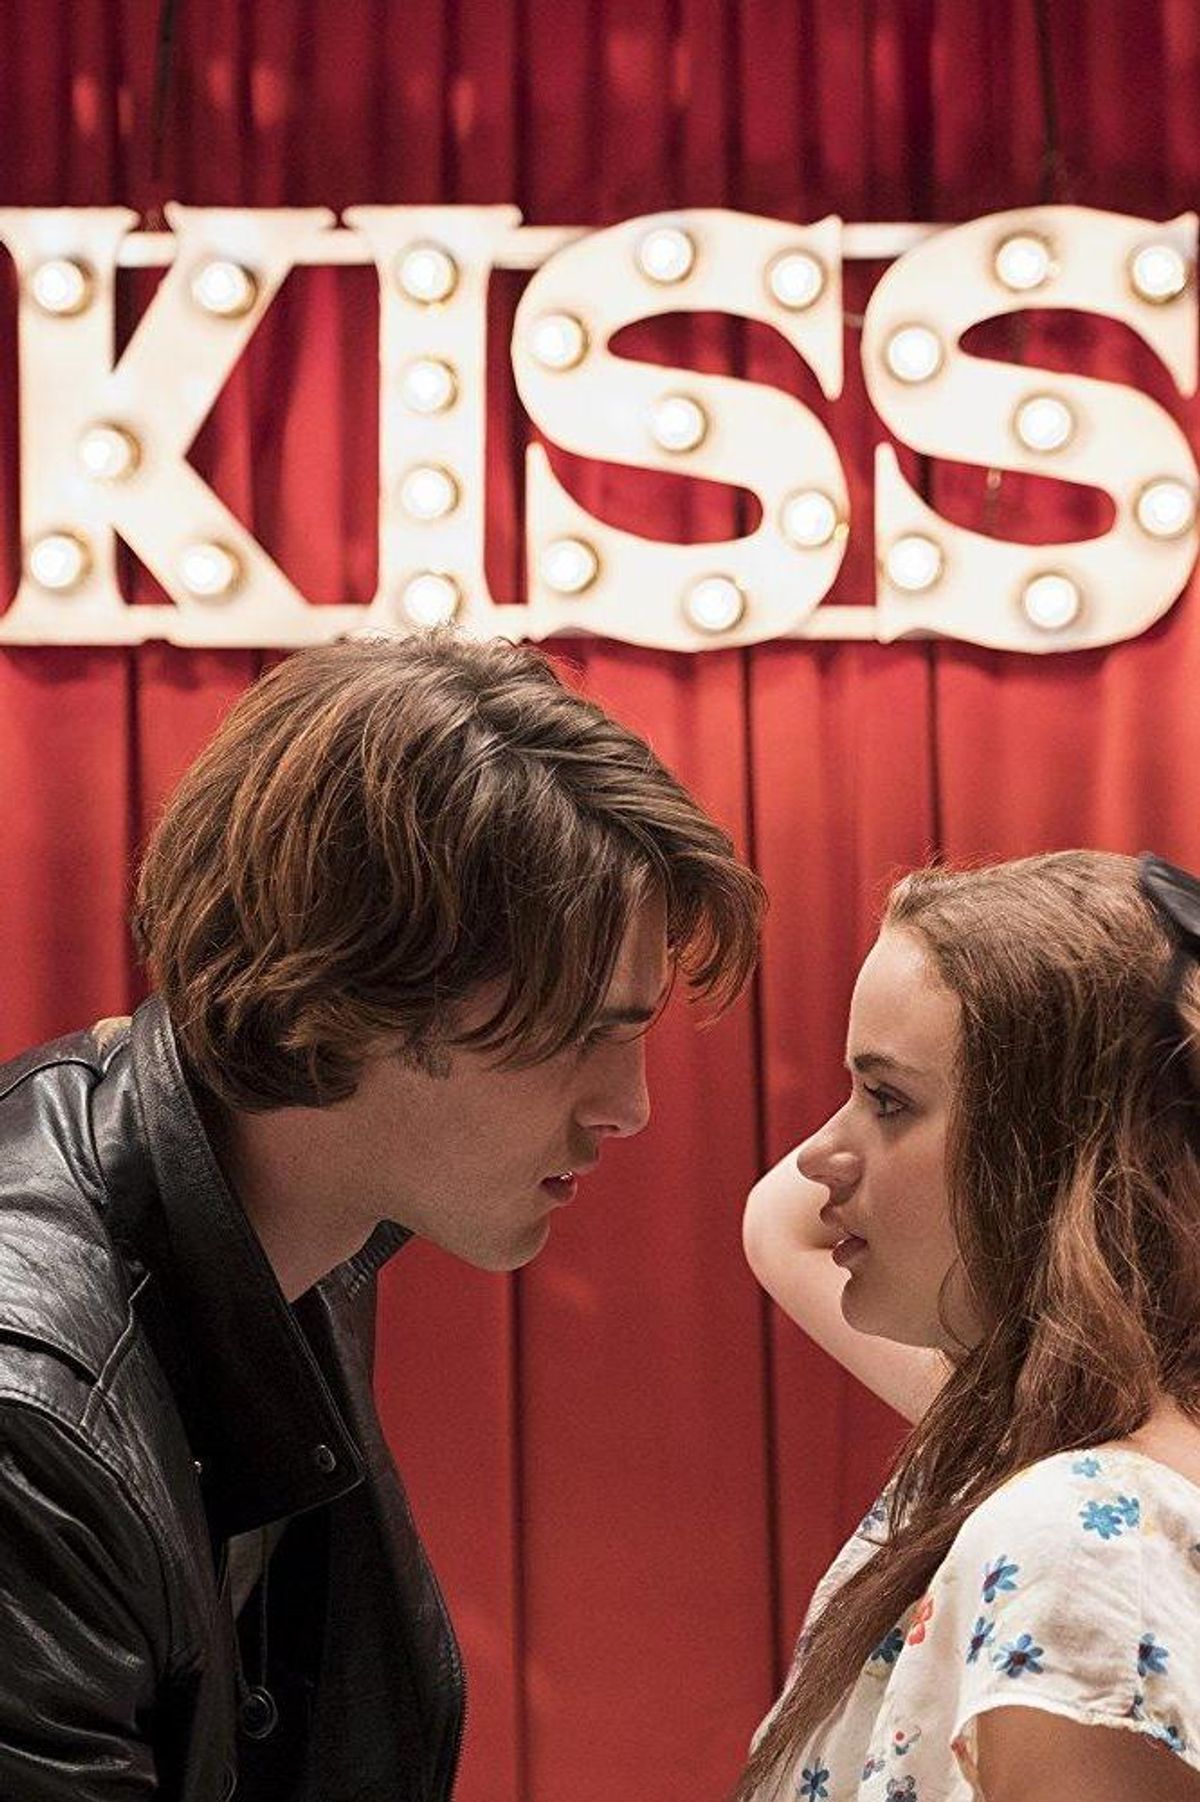 The Kissing Booth (2018) Movie Information & Trailers